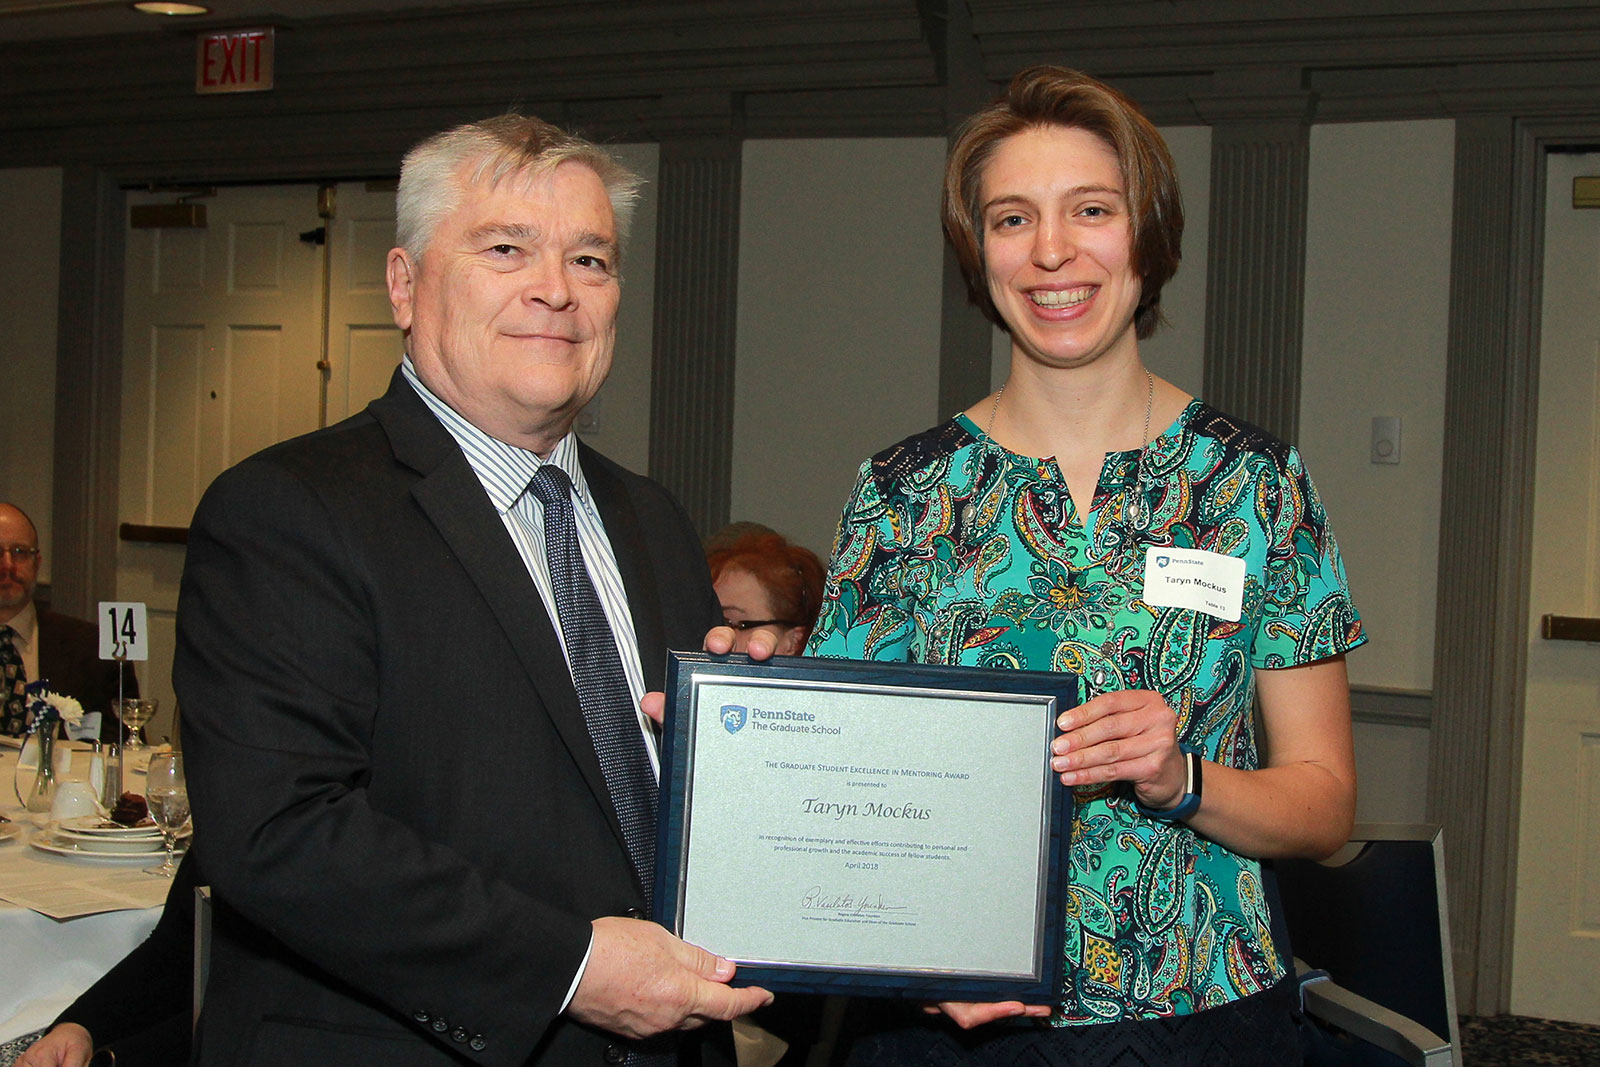 Taryn Mockus, a doctoral candidate in Neuroscience, received the University's Graduate Student Excellence in Mentoring Award in April 2018. She is pictured with University President Eric Barron. The two are standing side by side, each holding one side of a certificate with Mockus' name.